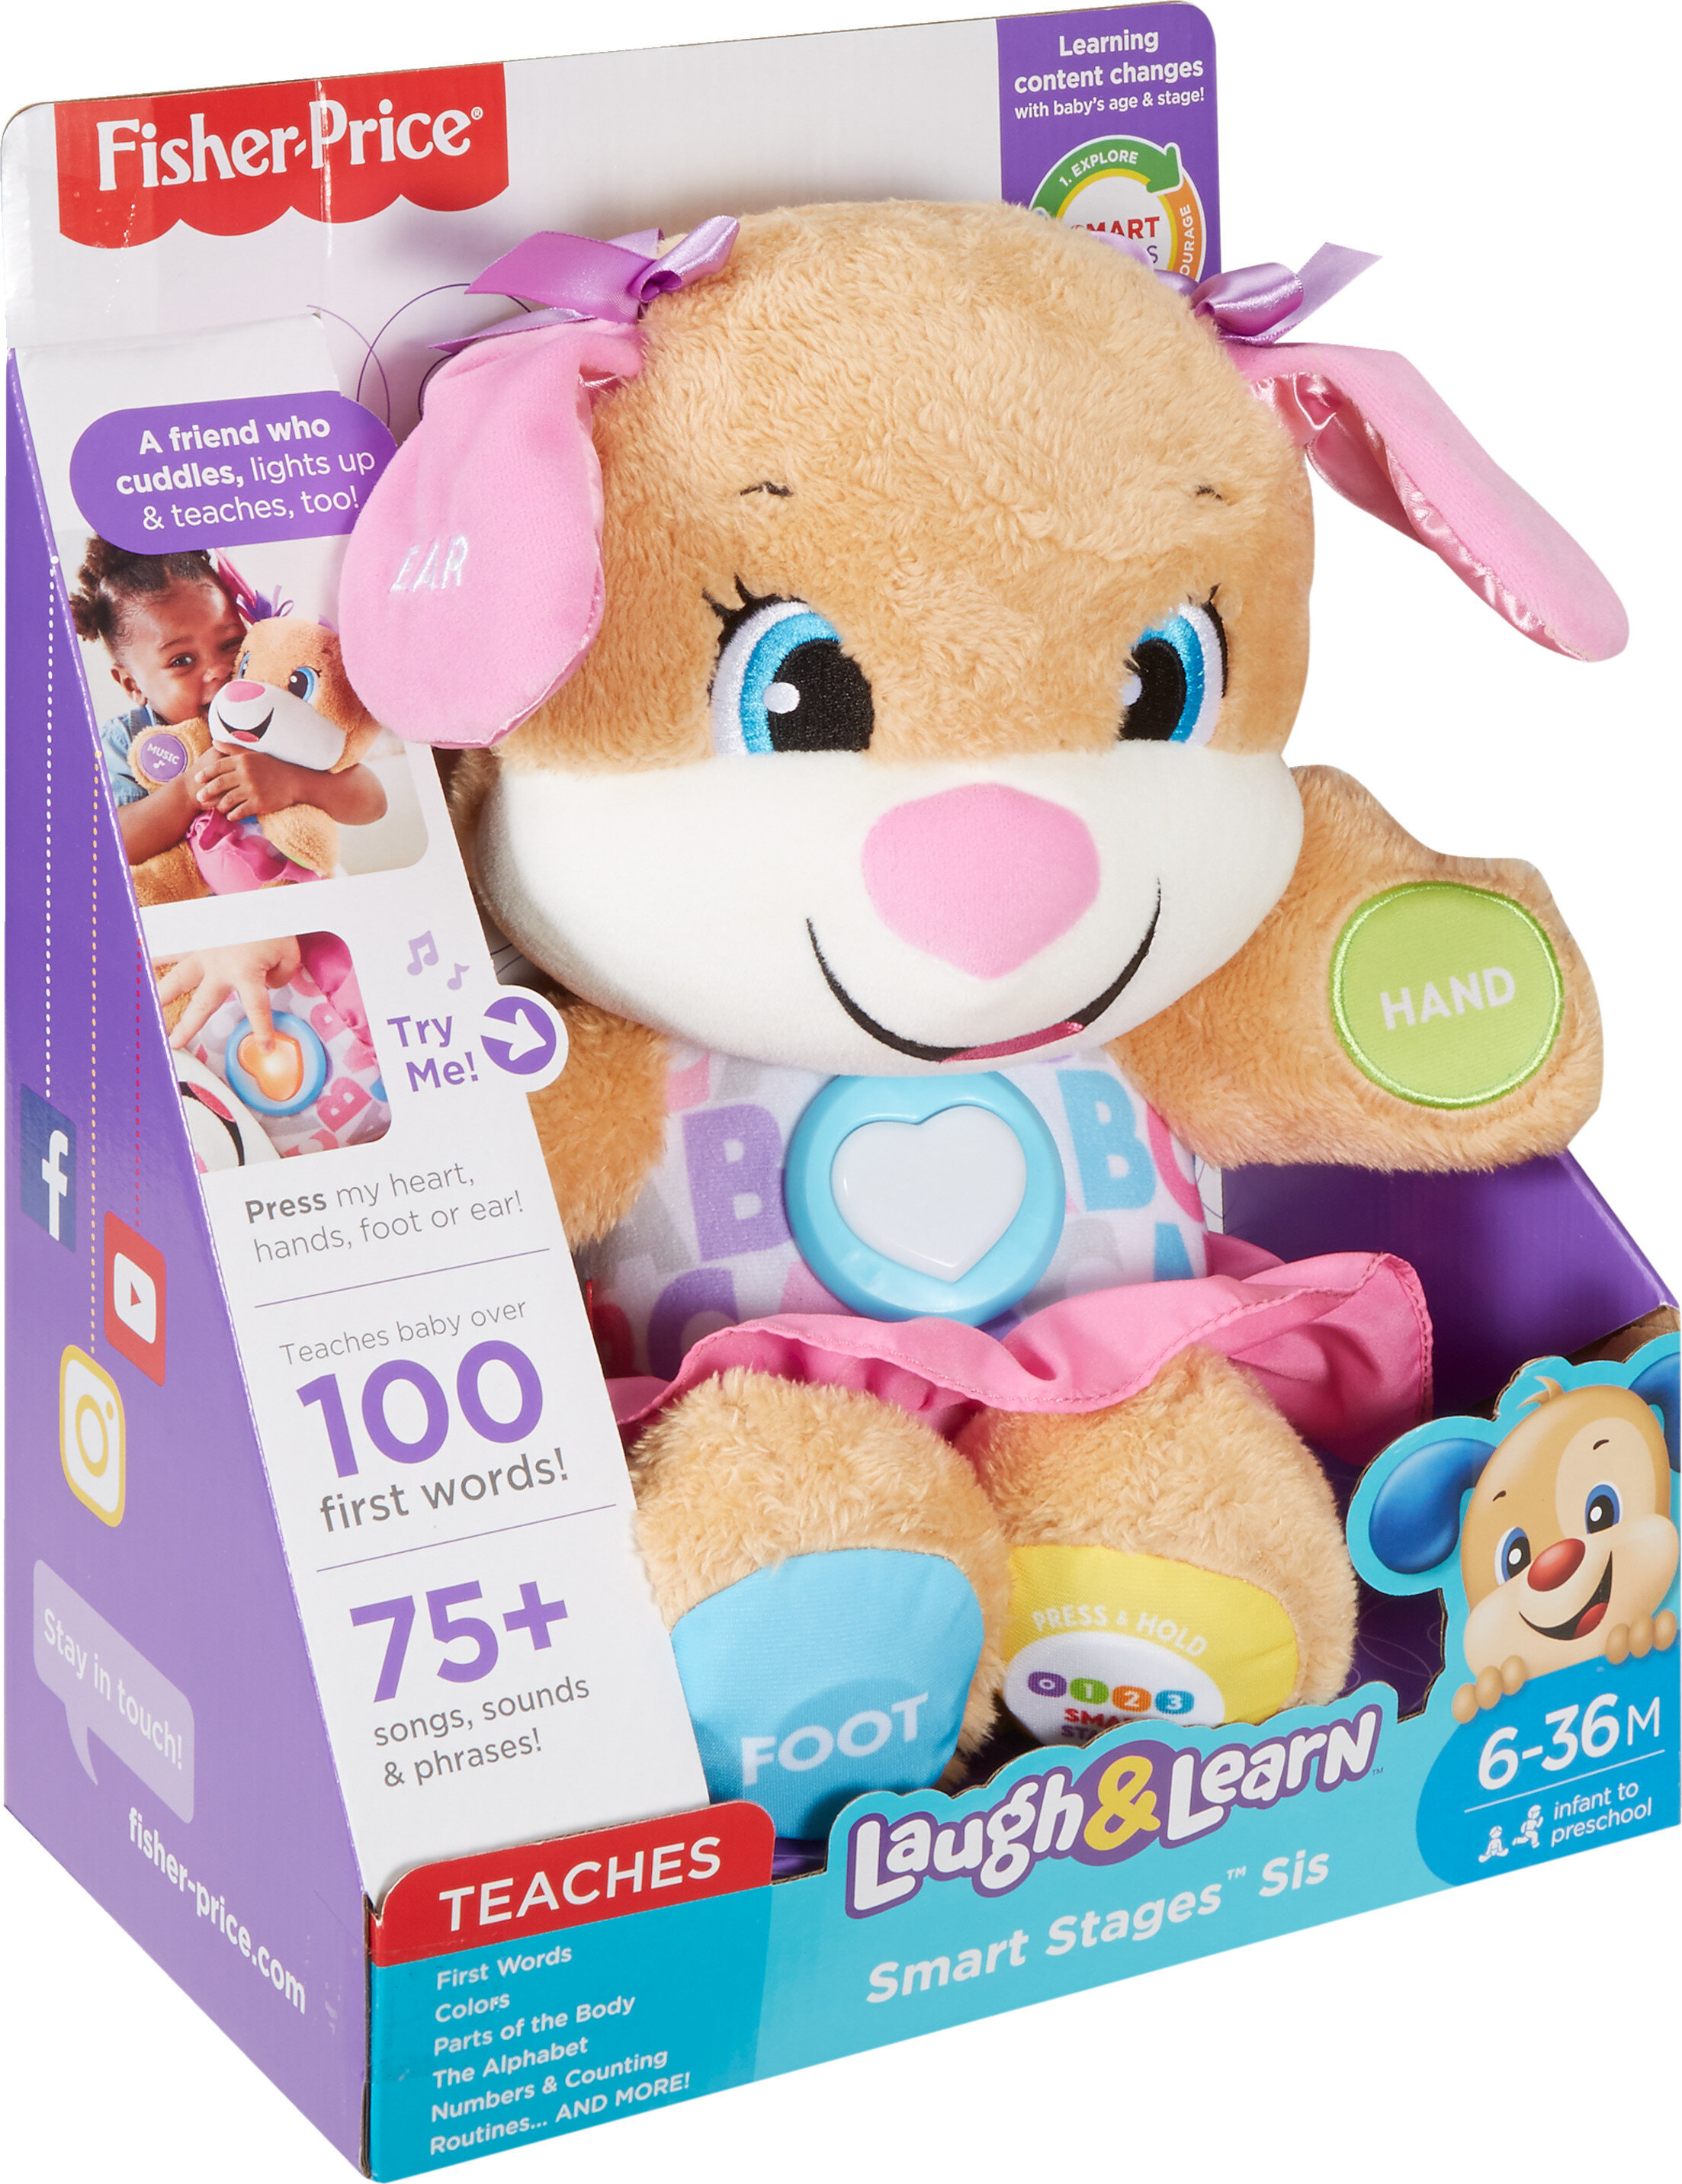 Fisher-Price Laugh & Learn Smart Stages Sis Puppy Plush Learning Toy for Baby, Infants and Toddlers, 6 months and up - image 7 of 8